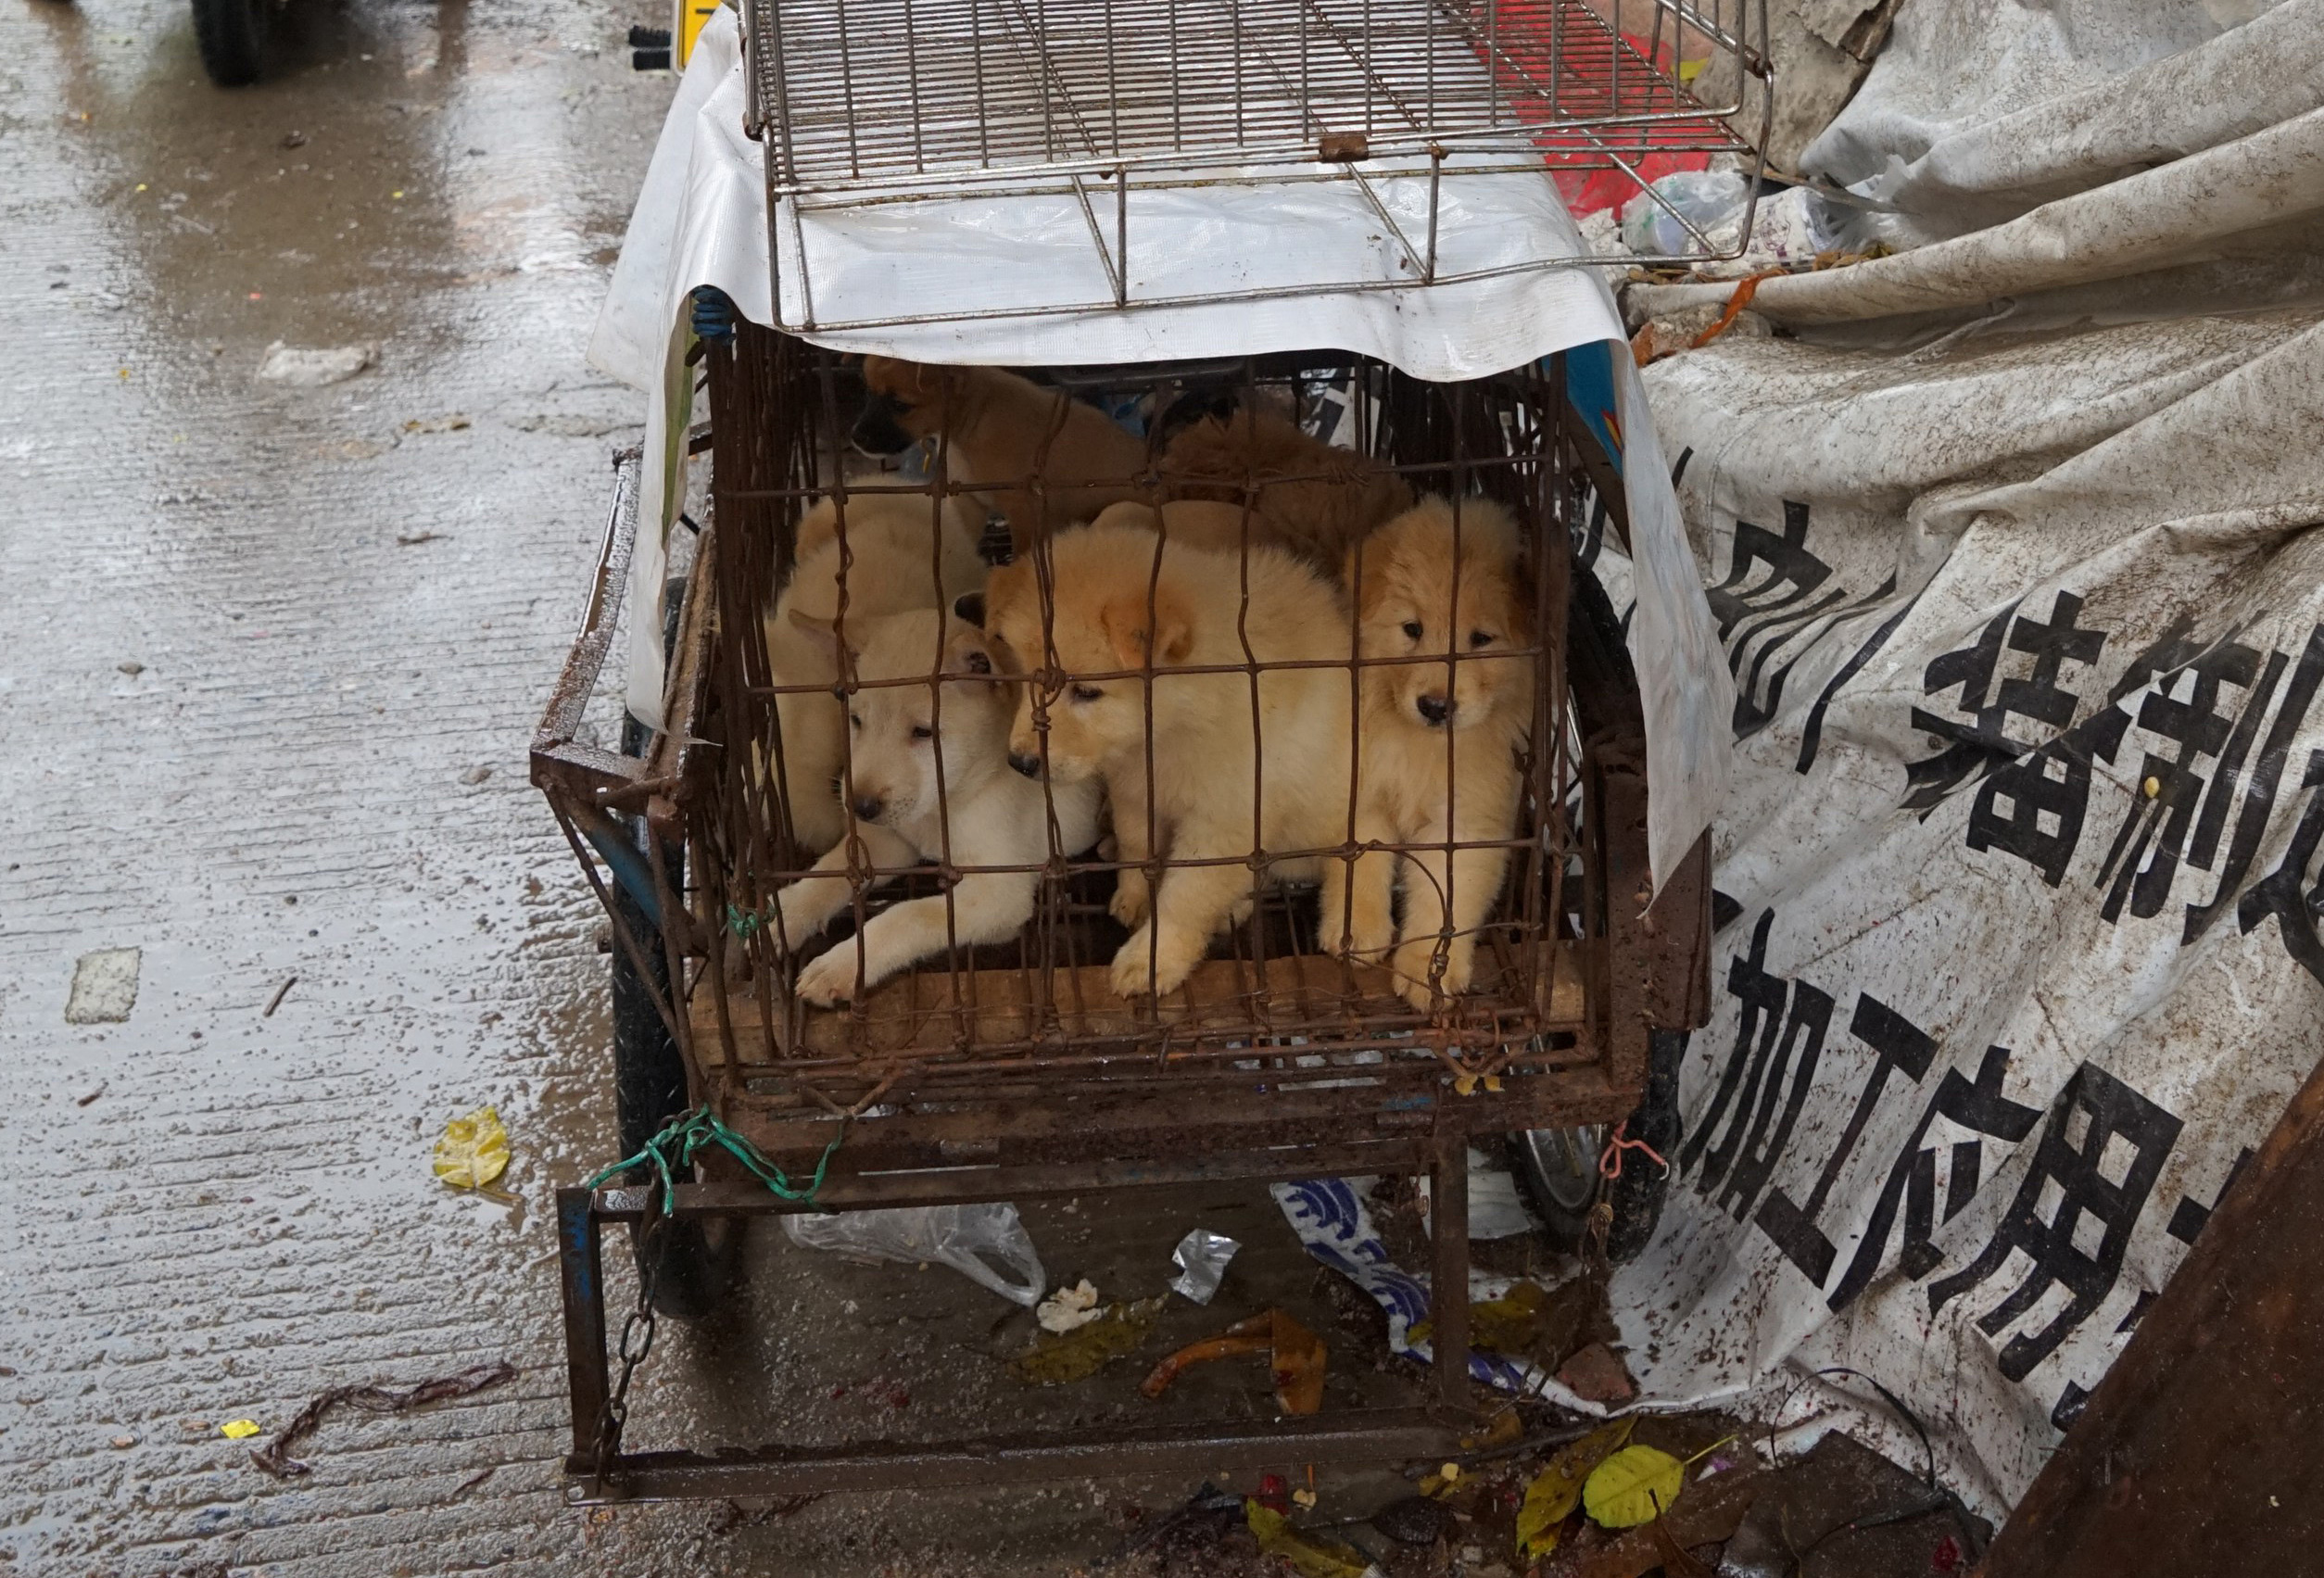 Pictures From Yulin Dog Meat Festival Show Heartbreaking Cruelty of